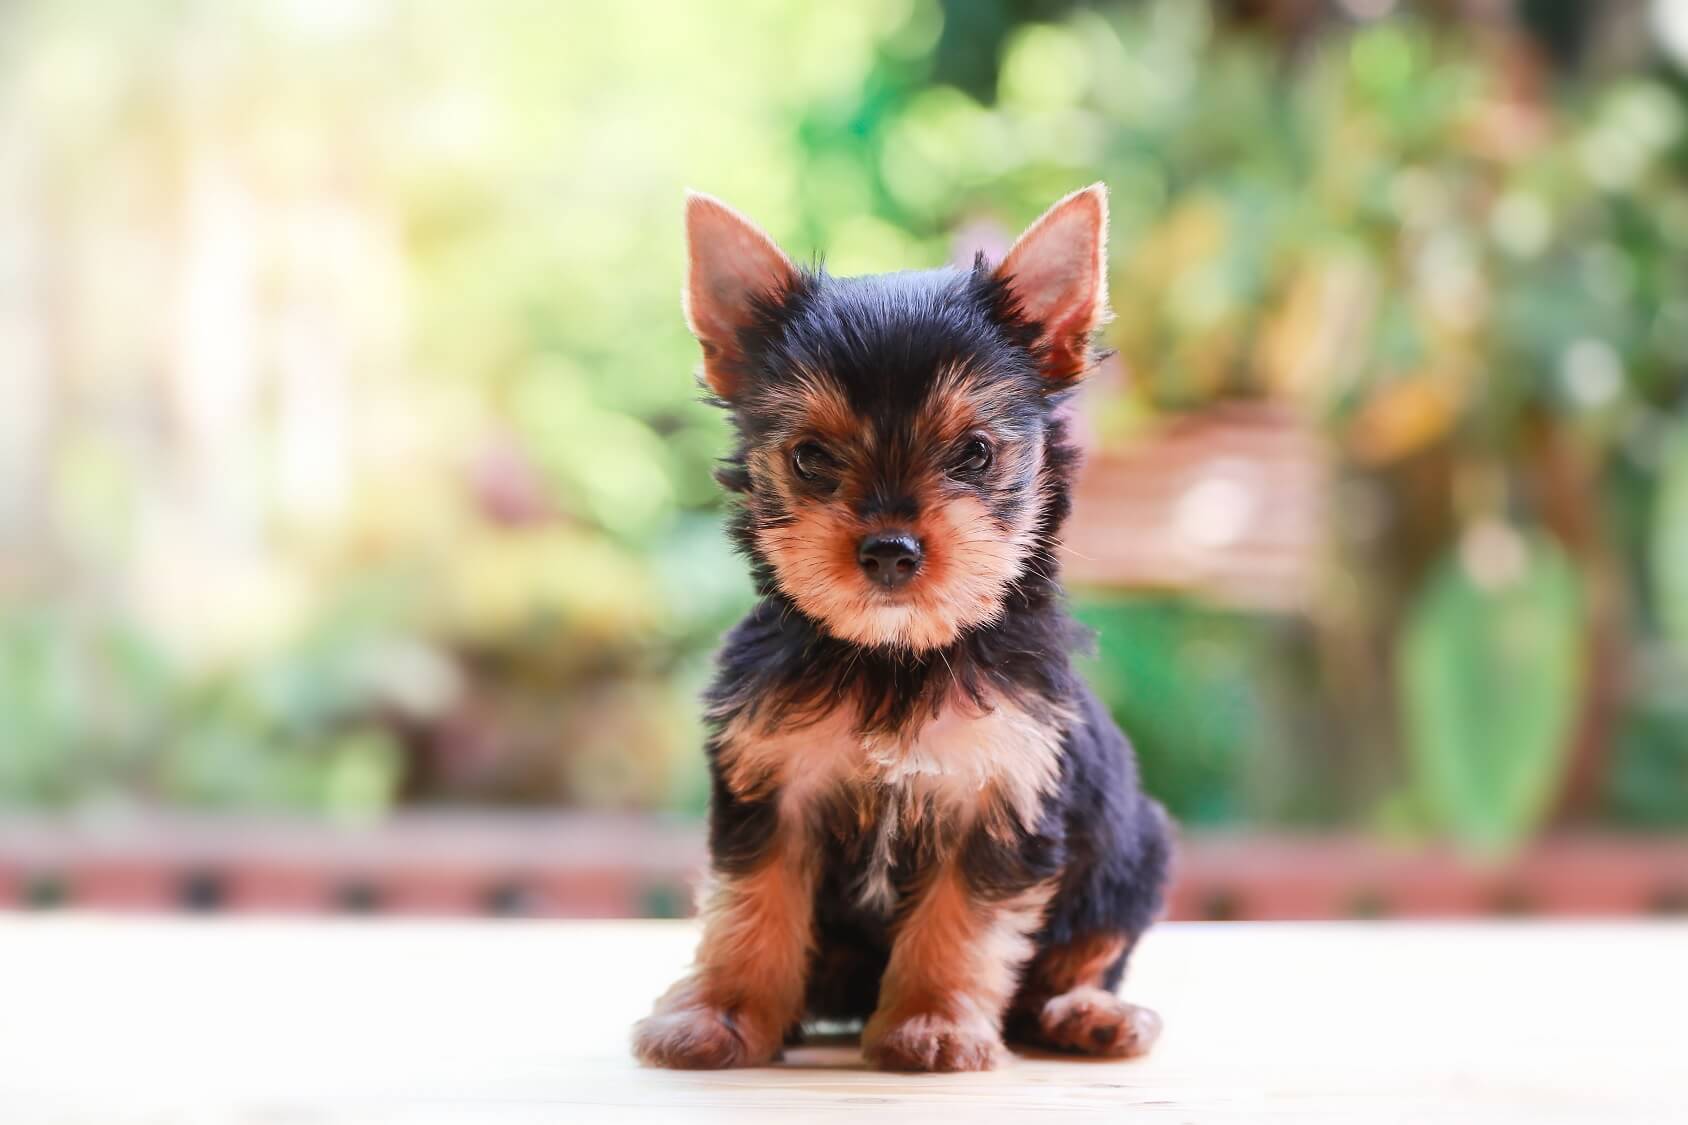 Teacup Yorkie: What To Know Before 